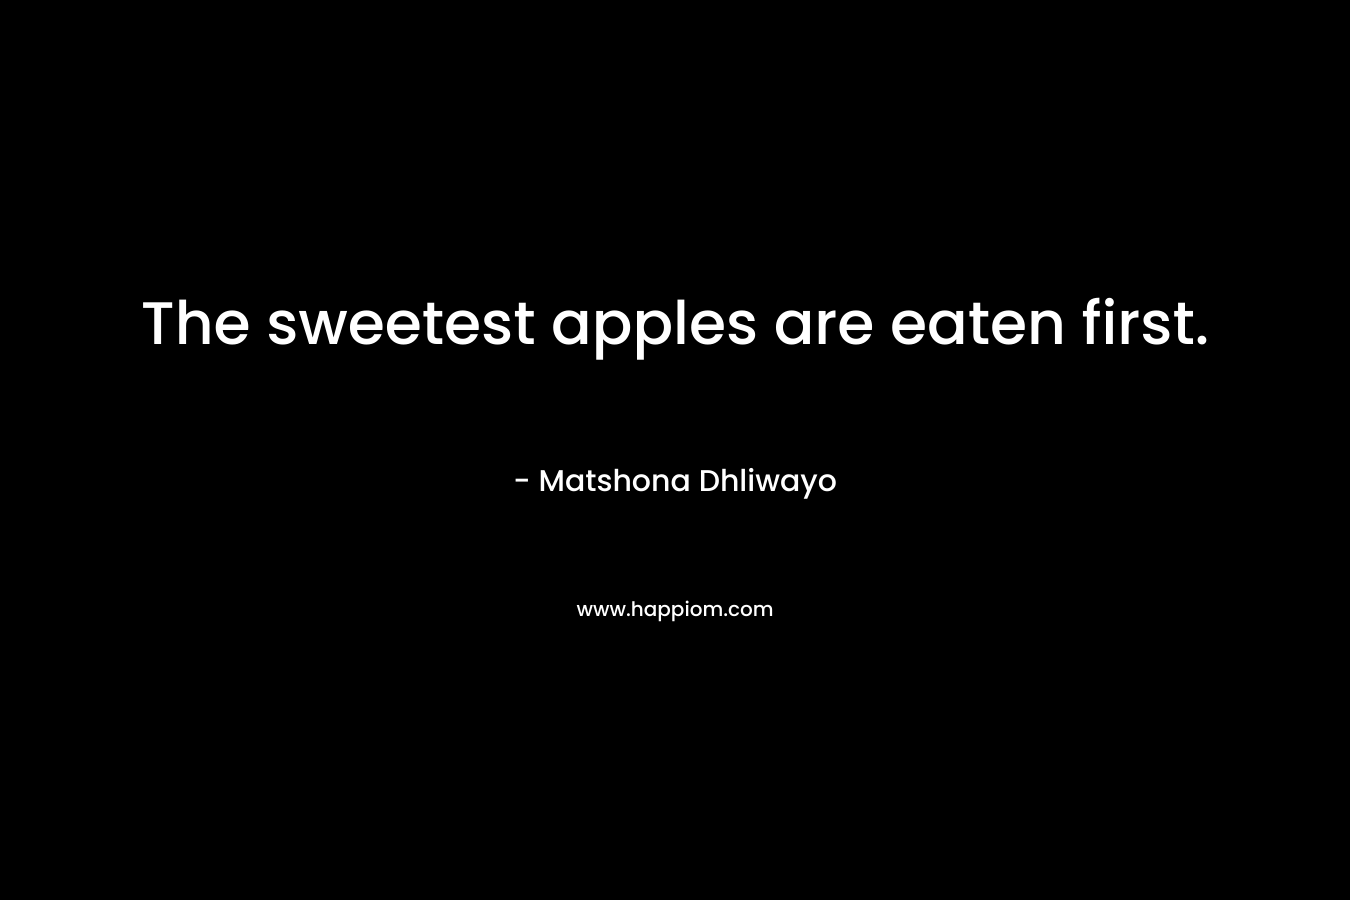 The sweetest apples are eaten first. – Matshona Dhliwayo